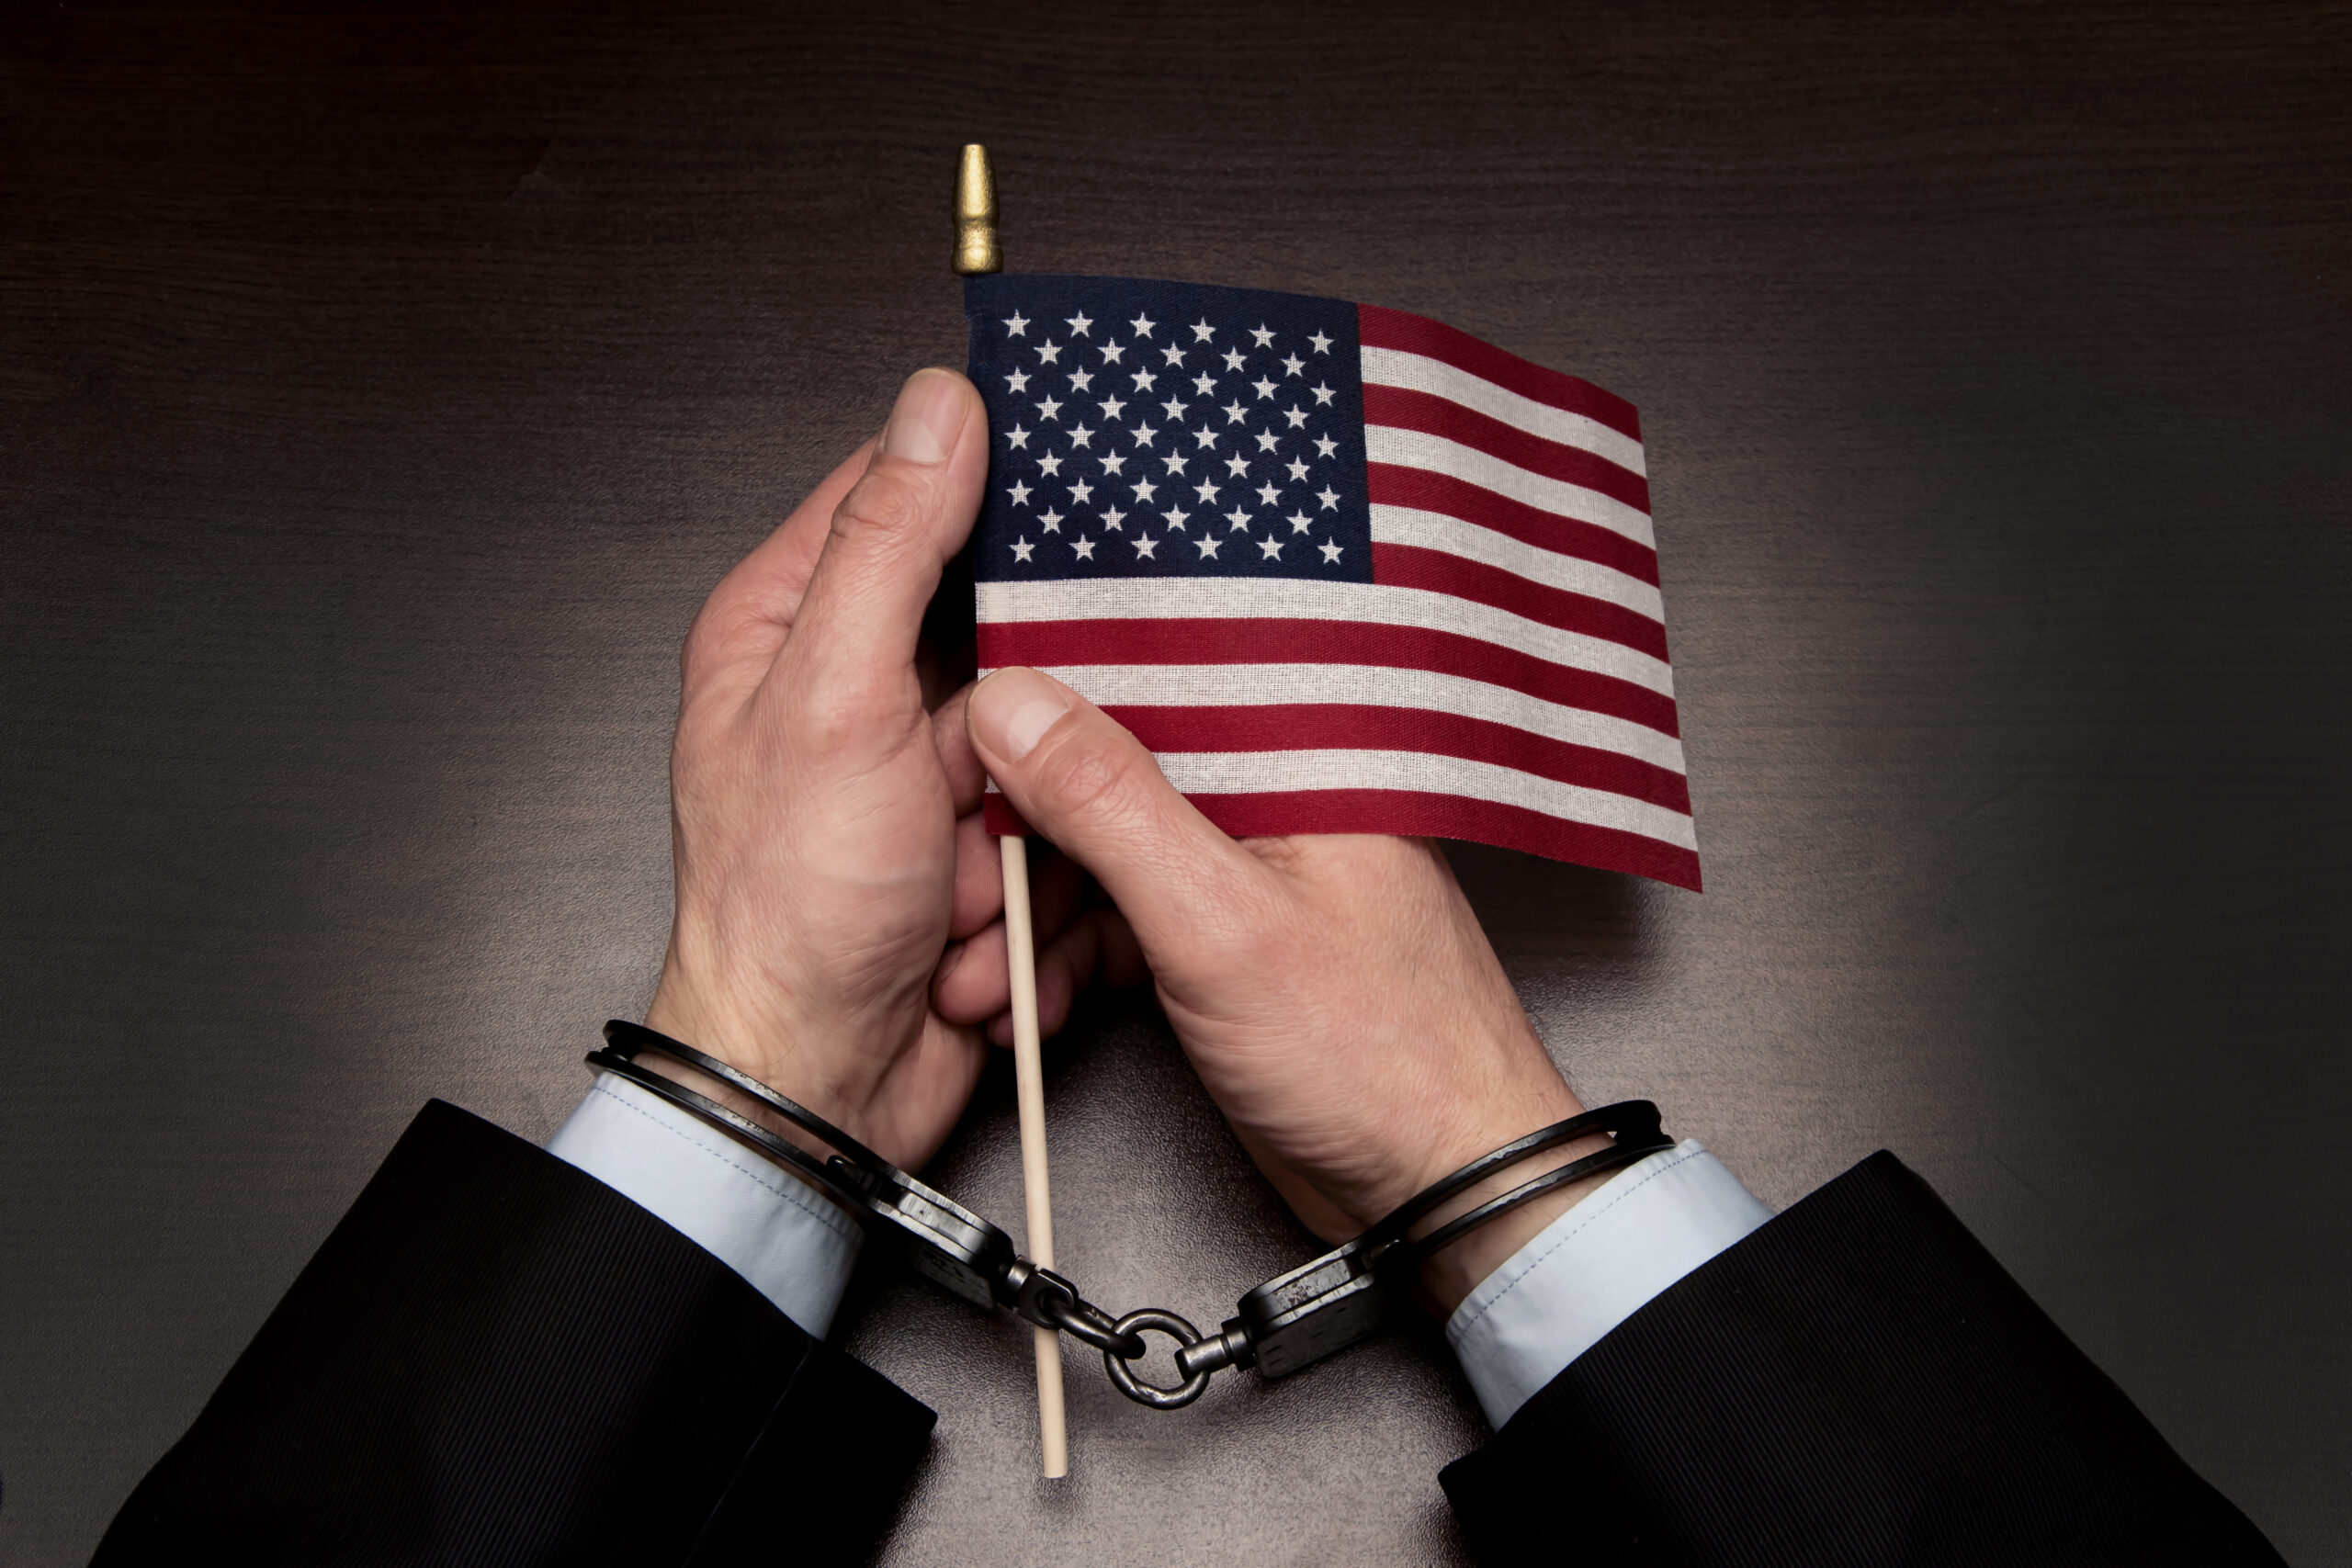 Men's hands in handcuffs hold the American flag in their hands. Concept: American prisoner, imaginary freedom, deportation from the country, persona non grata